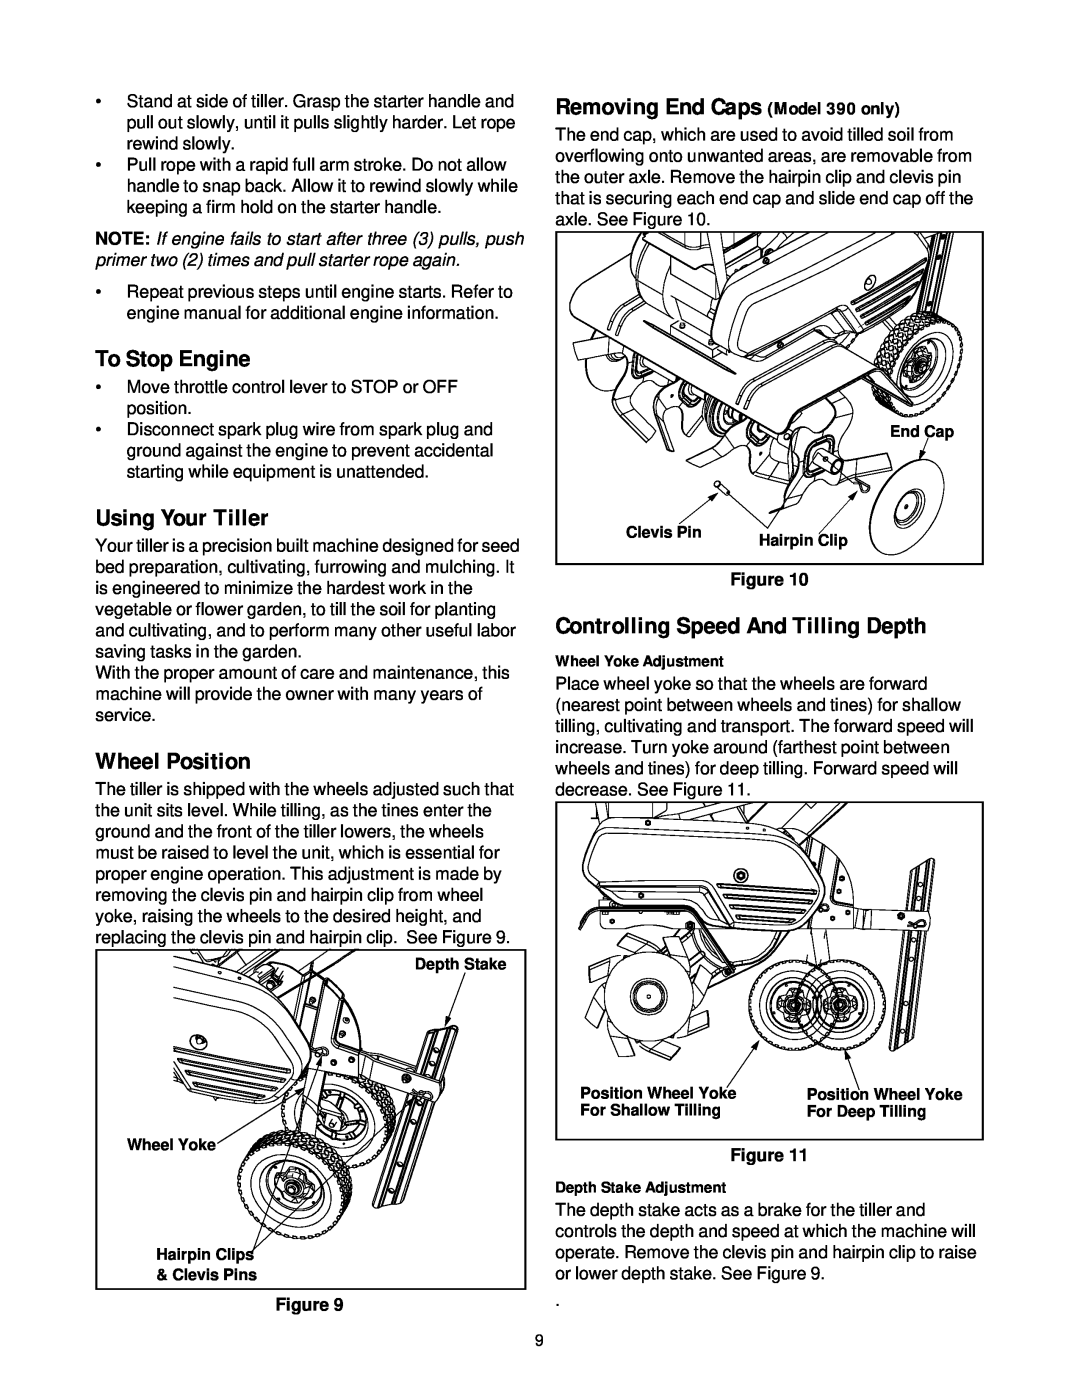 MTD 340 Thru 390 manual To Stop Engine, Using Your Tiller, Wheel Position, Removing End Caps Model 390 only 